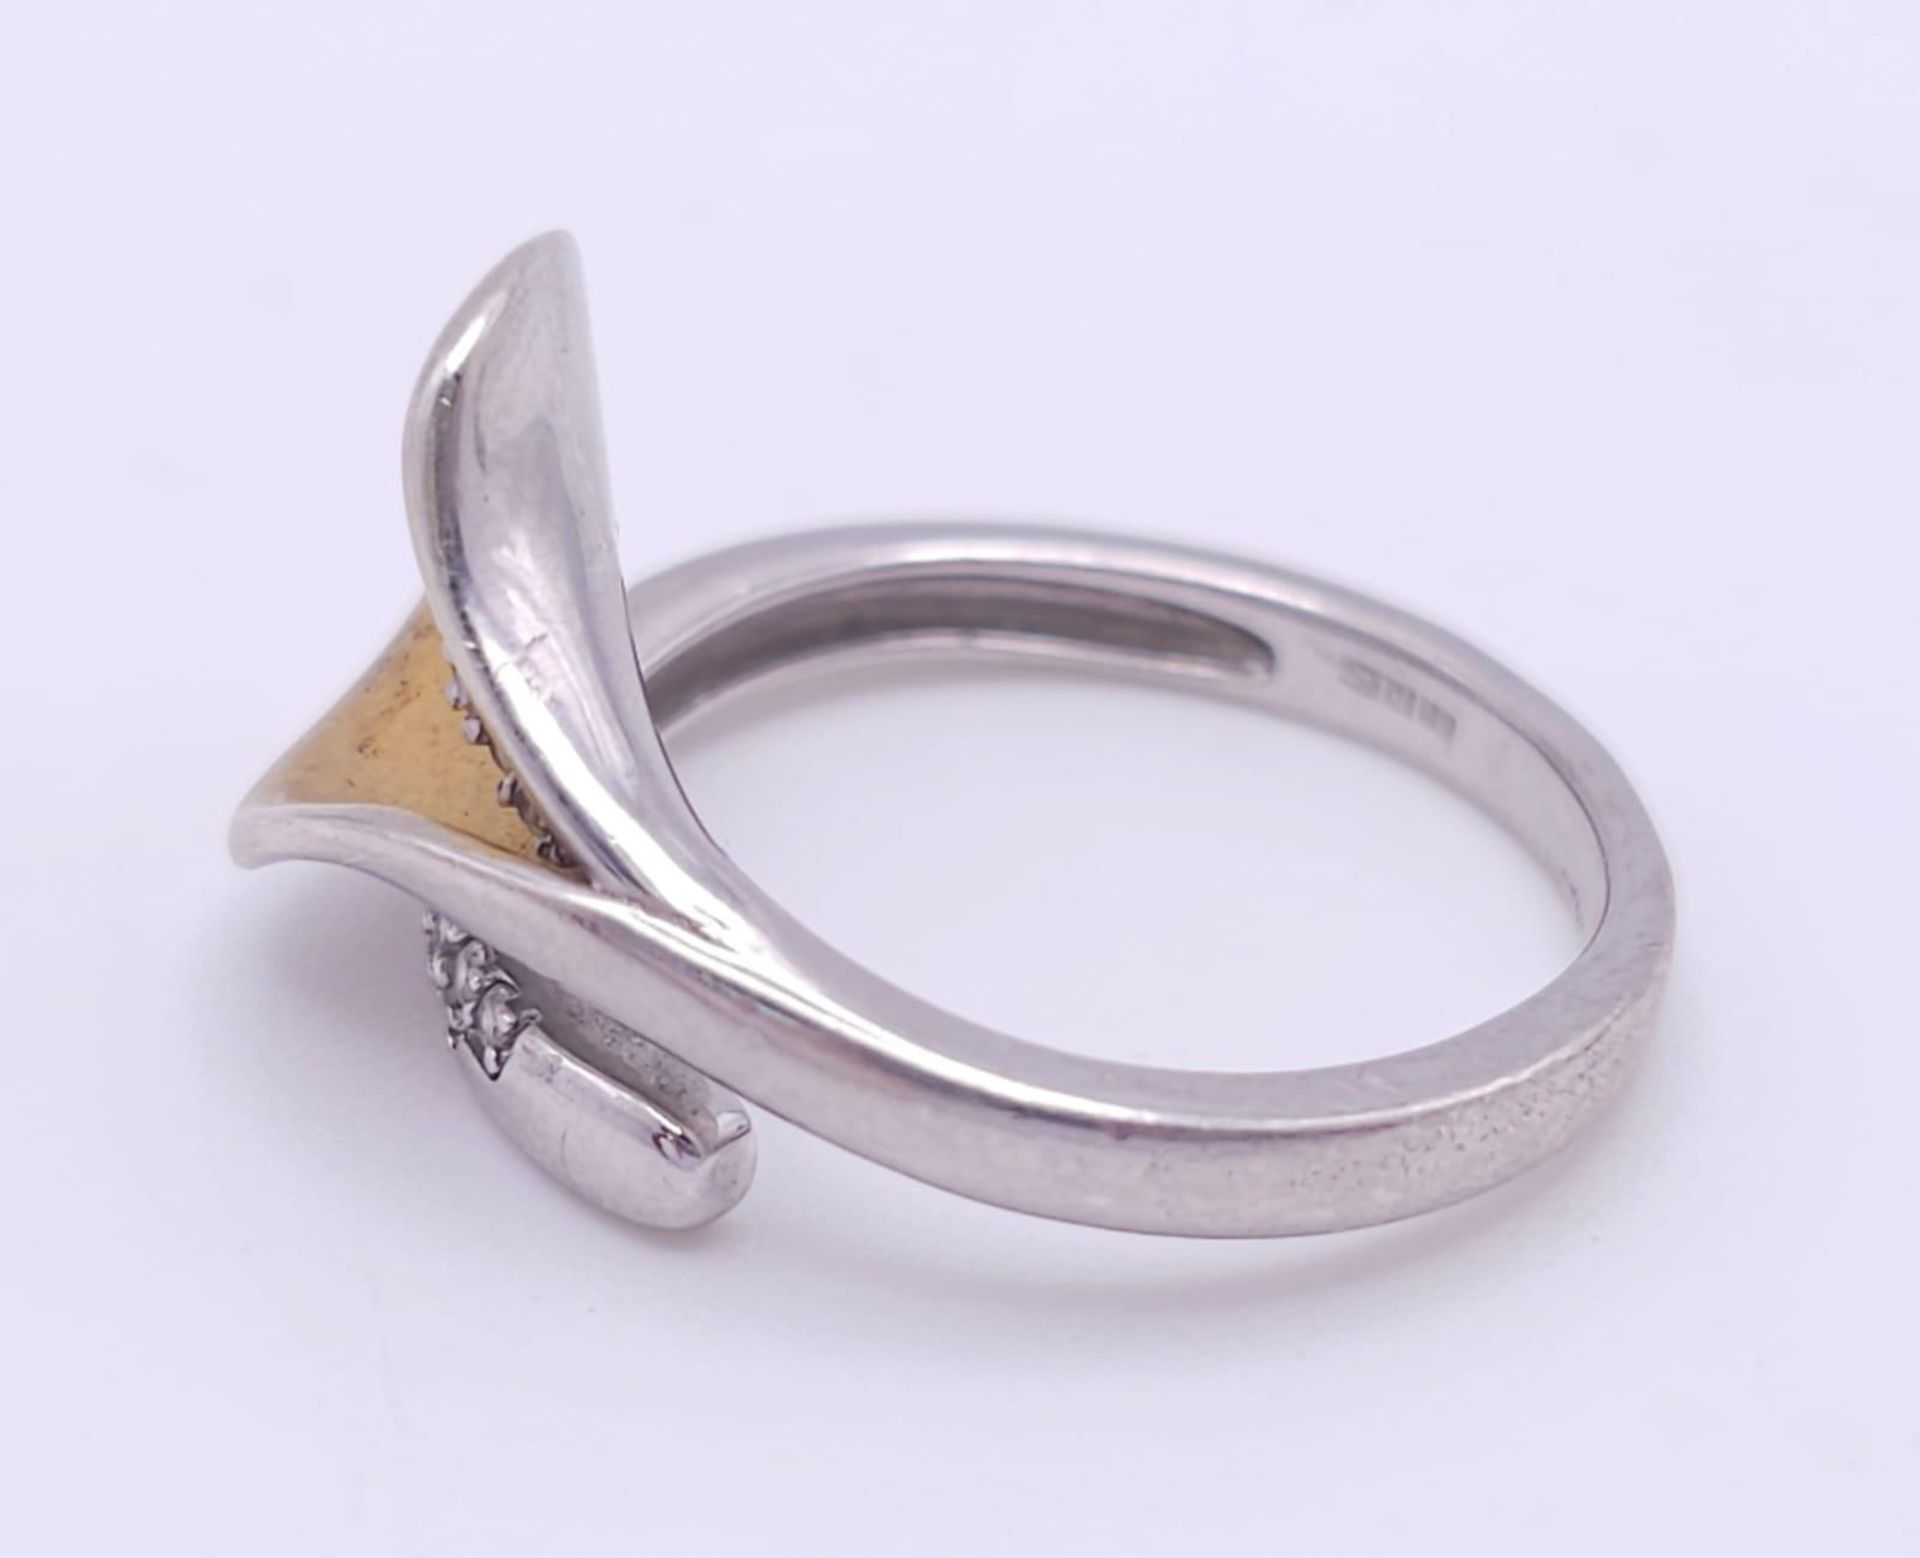 Three Different Style Fancy Sterling Silver Rings - 2 x P, 1 x N. 21.2g total weight. Ref: 016551. - Image 16 of 19